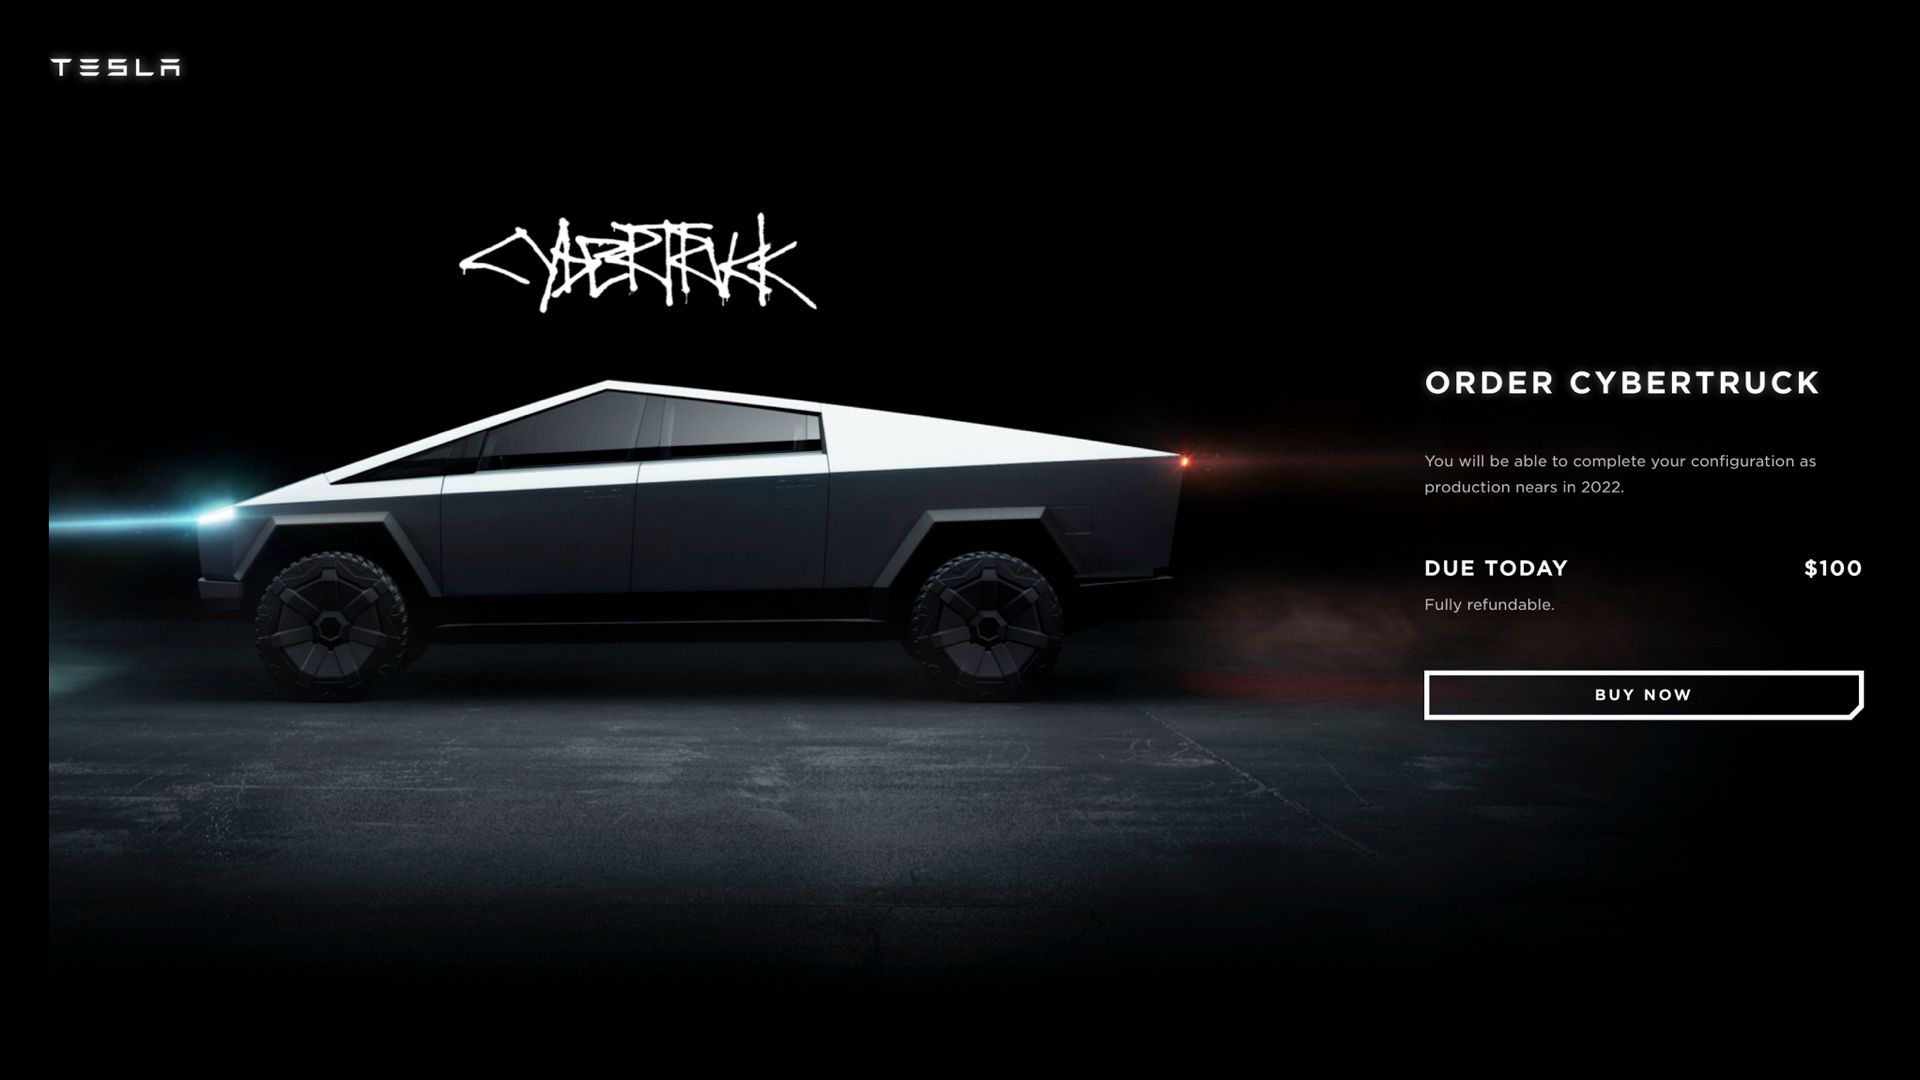 Cybertruck order page